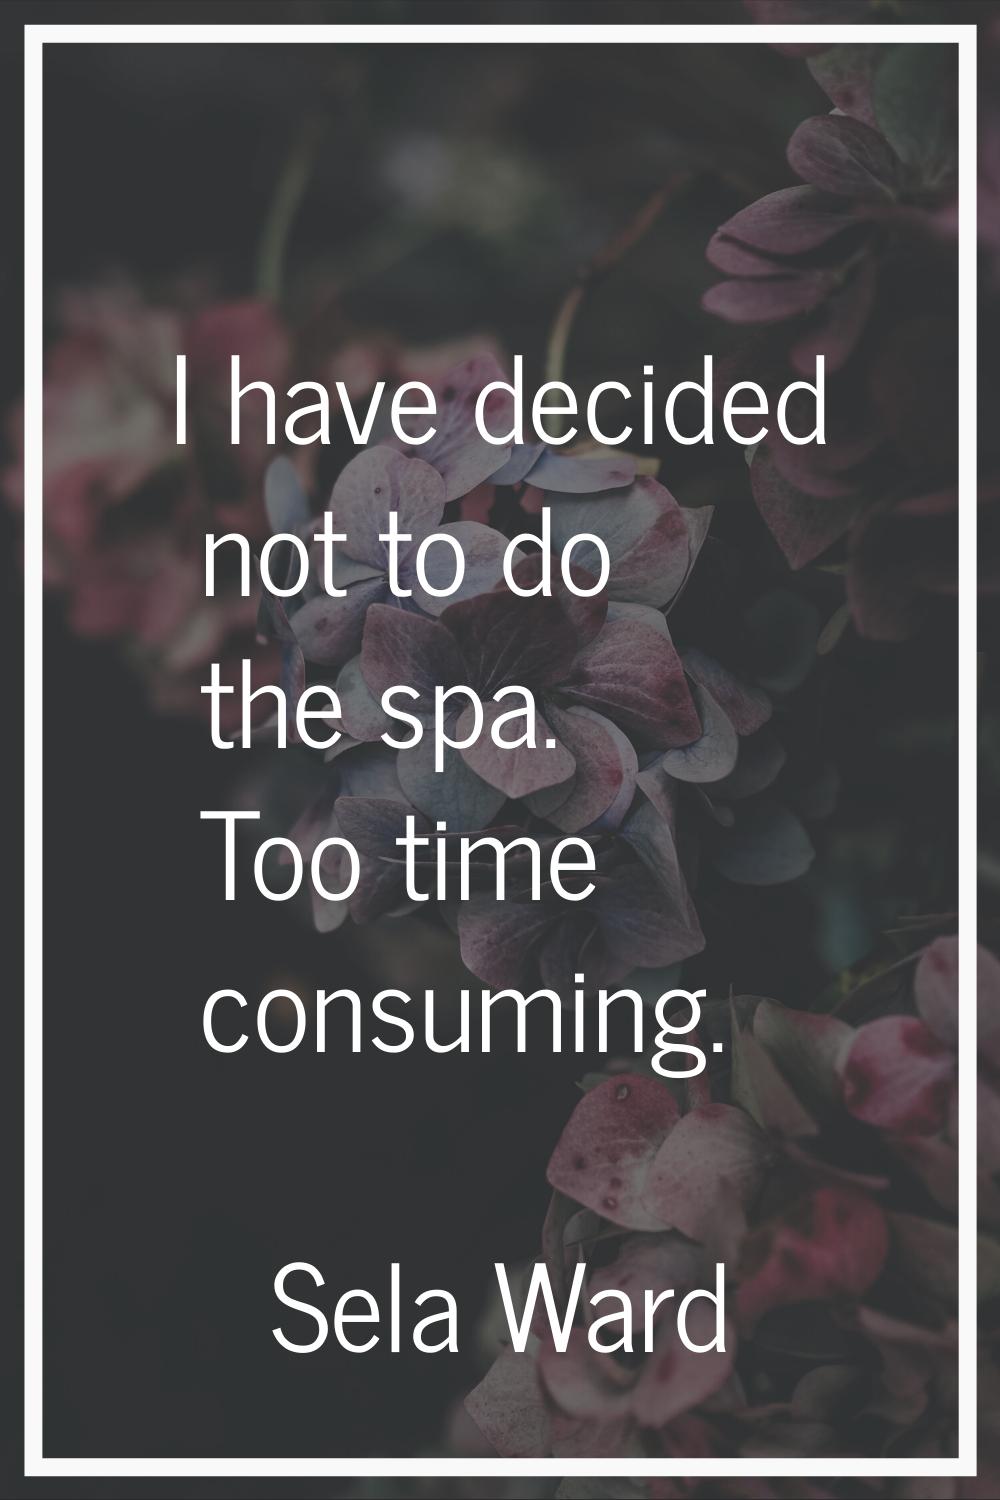 I have decided not to do the spa. Too time consuming.